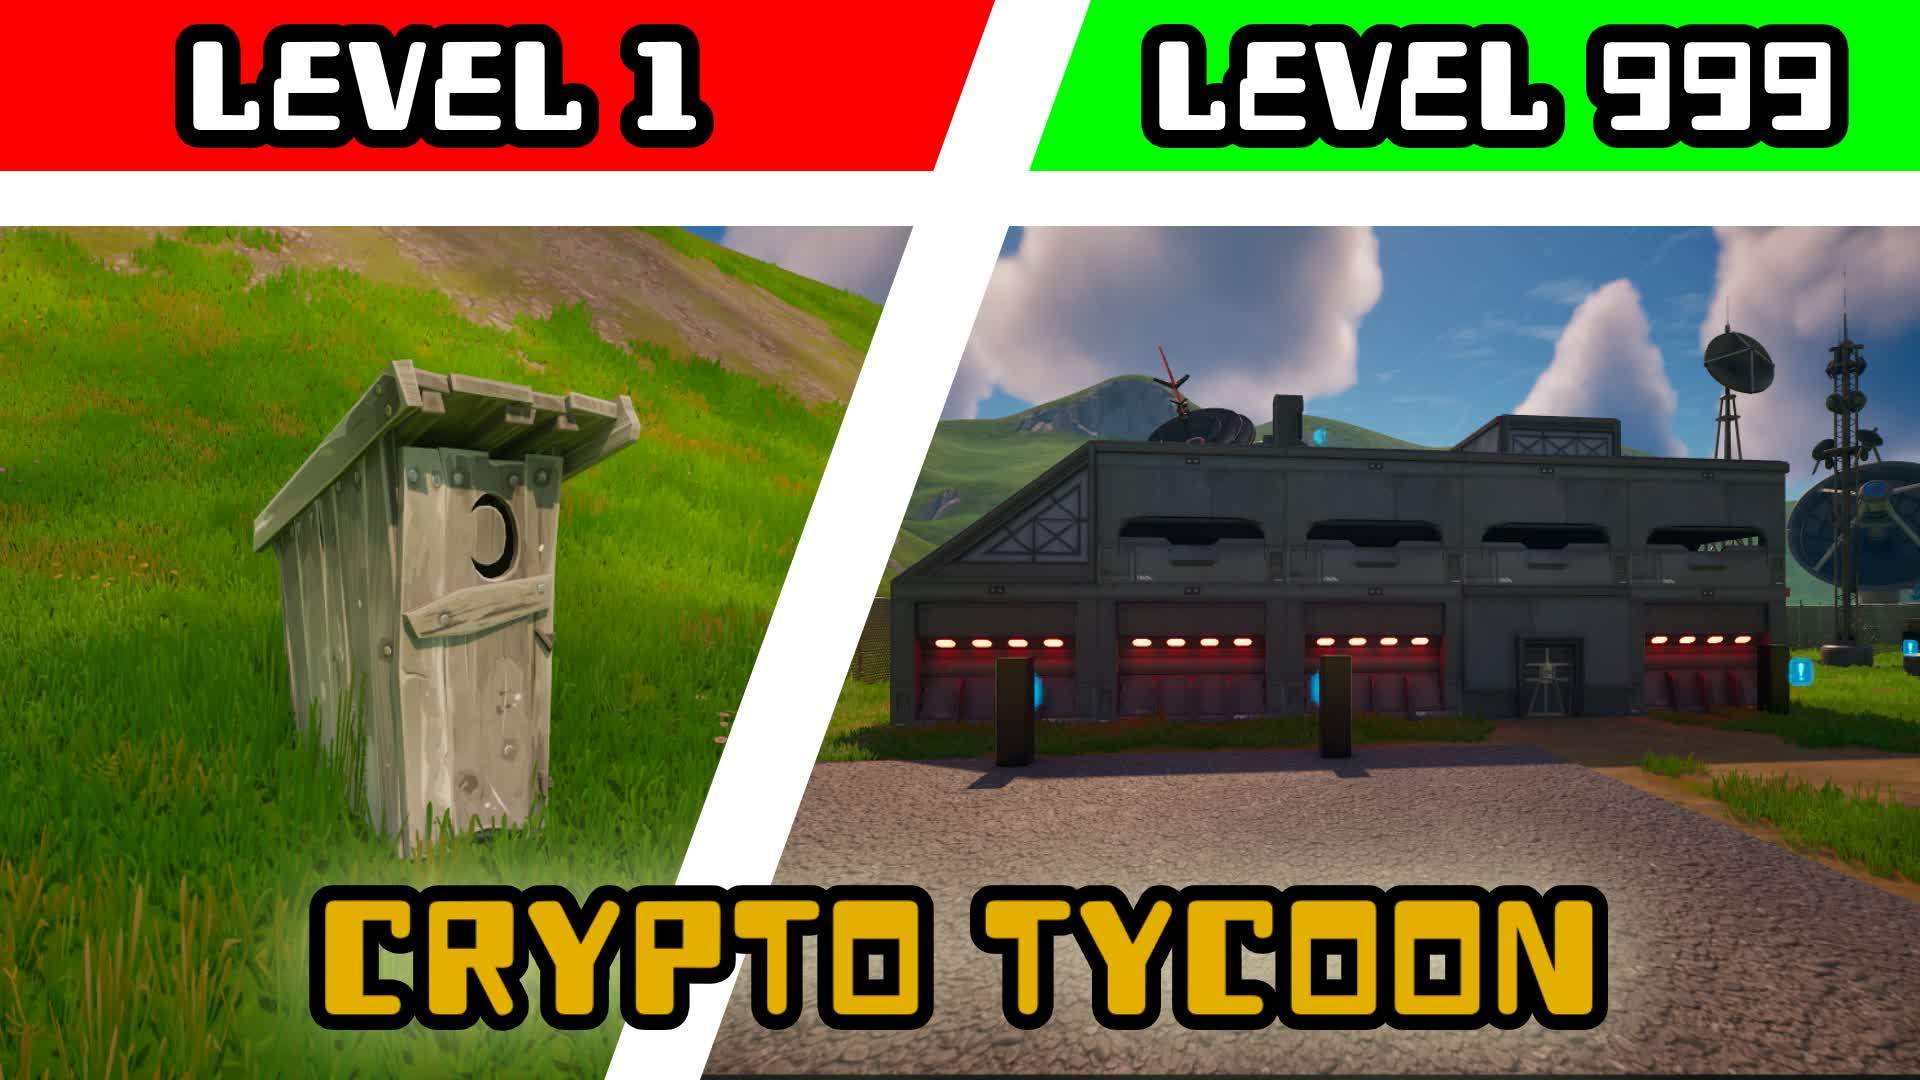 TOILET DEFENSE TYCOON 🚽🔥 4122-2705-0229 by avmws - Fortnite Creative Map  Code 